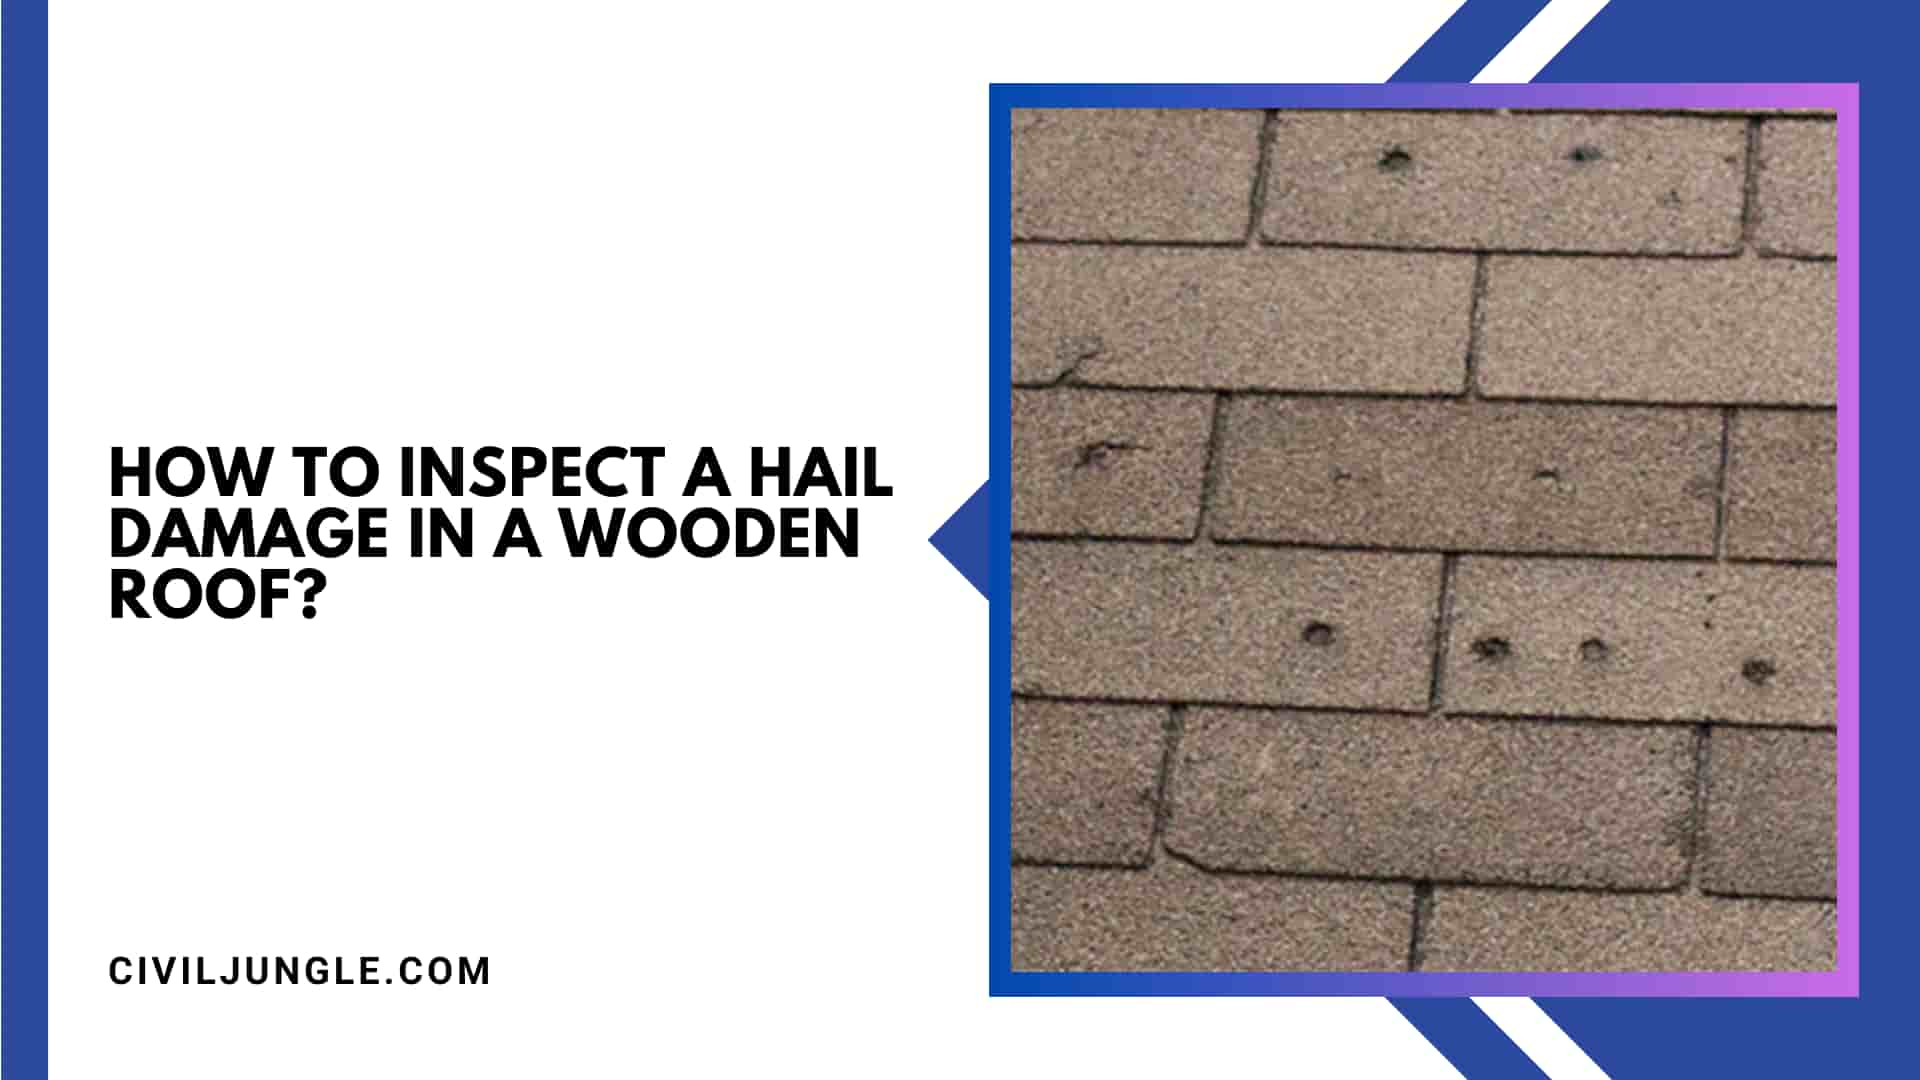 How to Inspect a Hail Damage in a Wooden Roof?